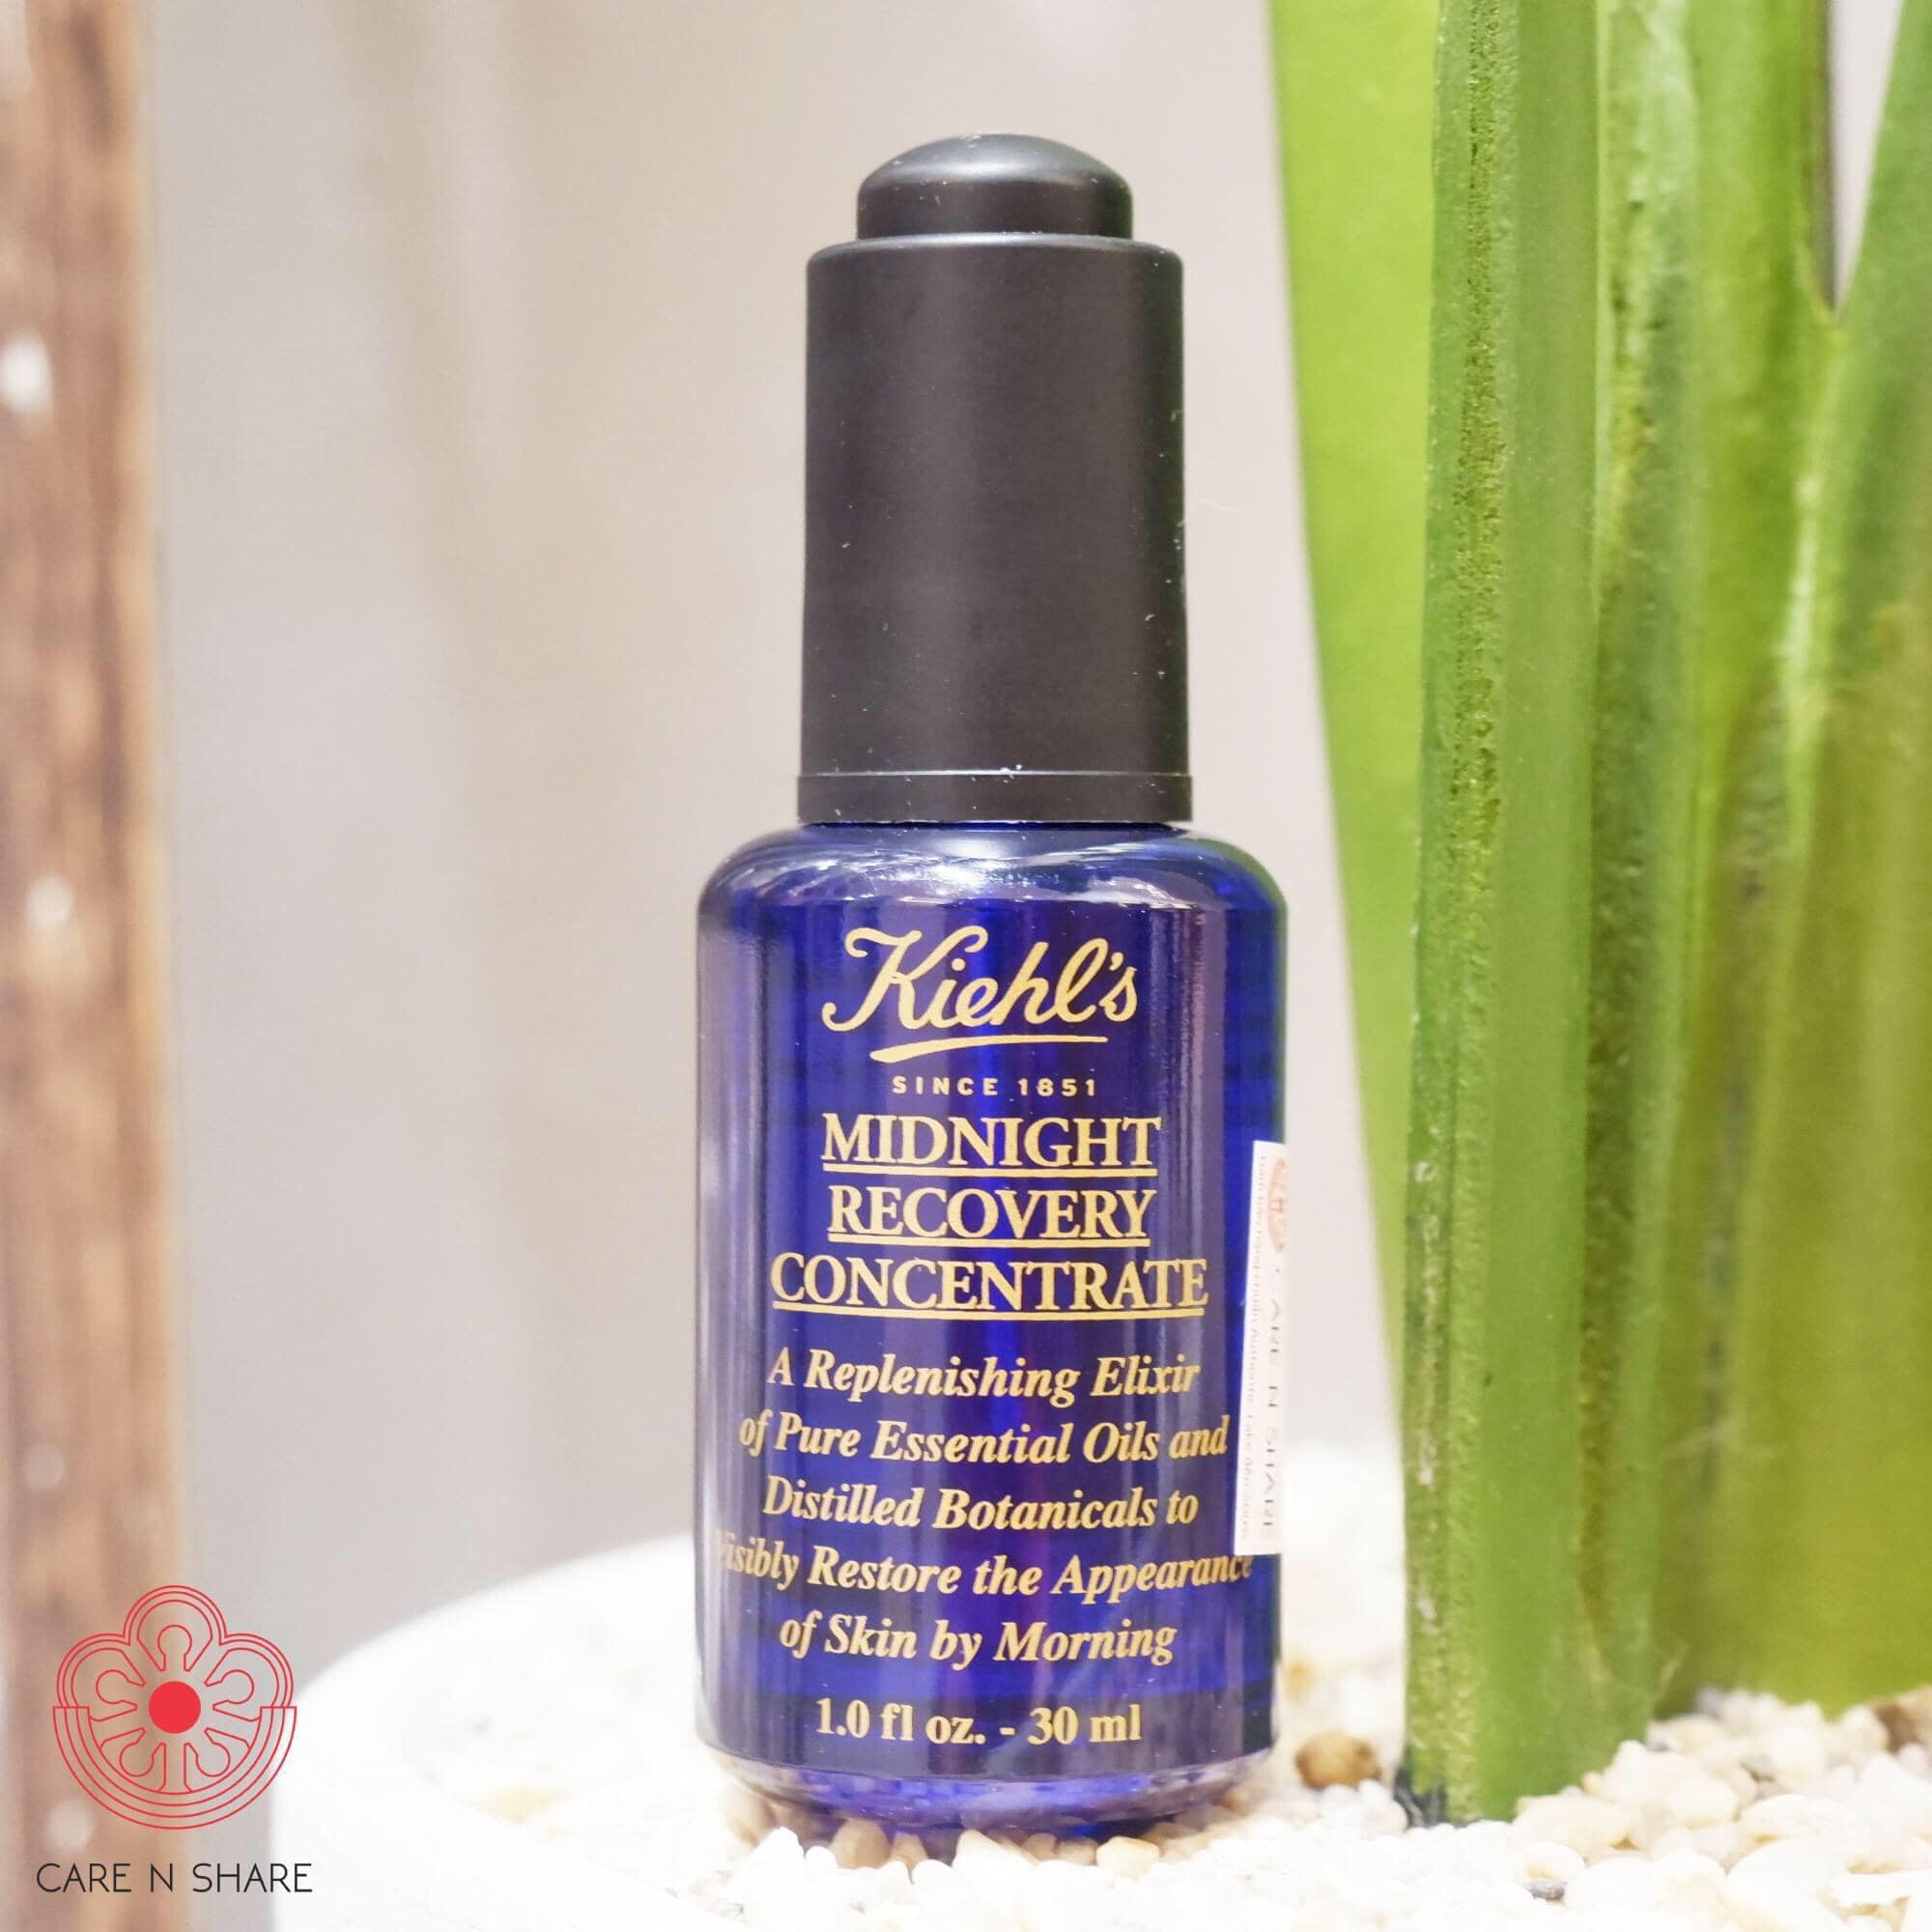 SERUM MIDNIGHT RECOVERY CONCENTRATE KIEHL’S